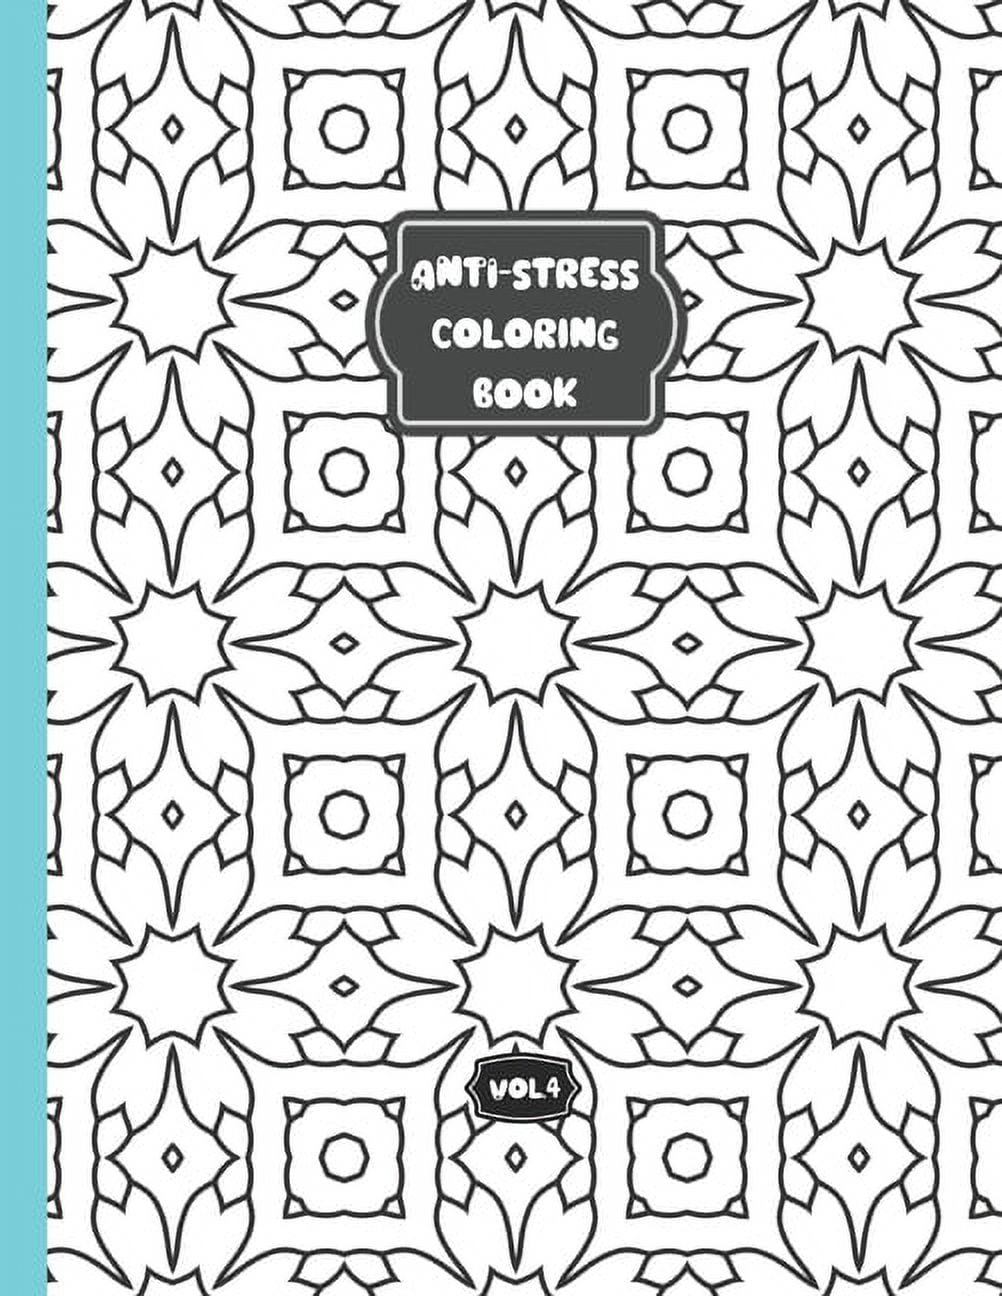 Anti-stress Coloring Book - Vol 4: Relaxing Coloring Book for Adults and Kids - 50 Different Patterns [Book]